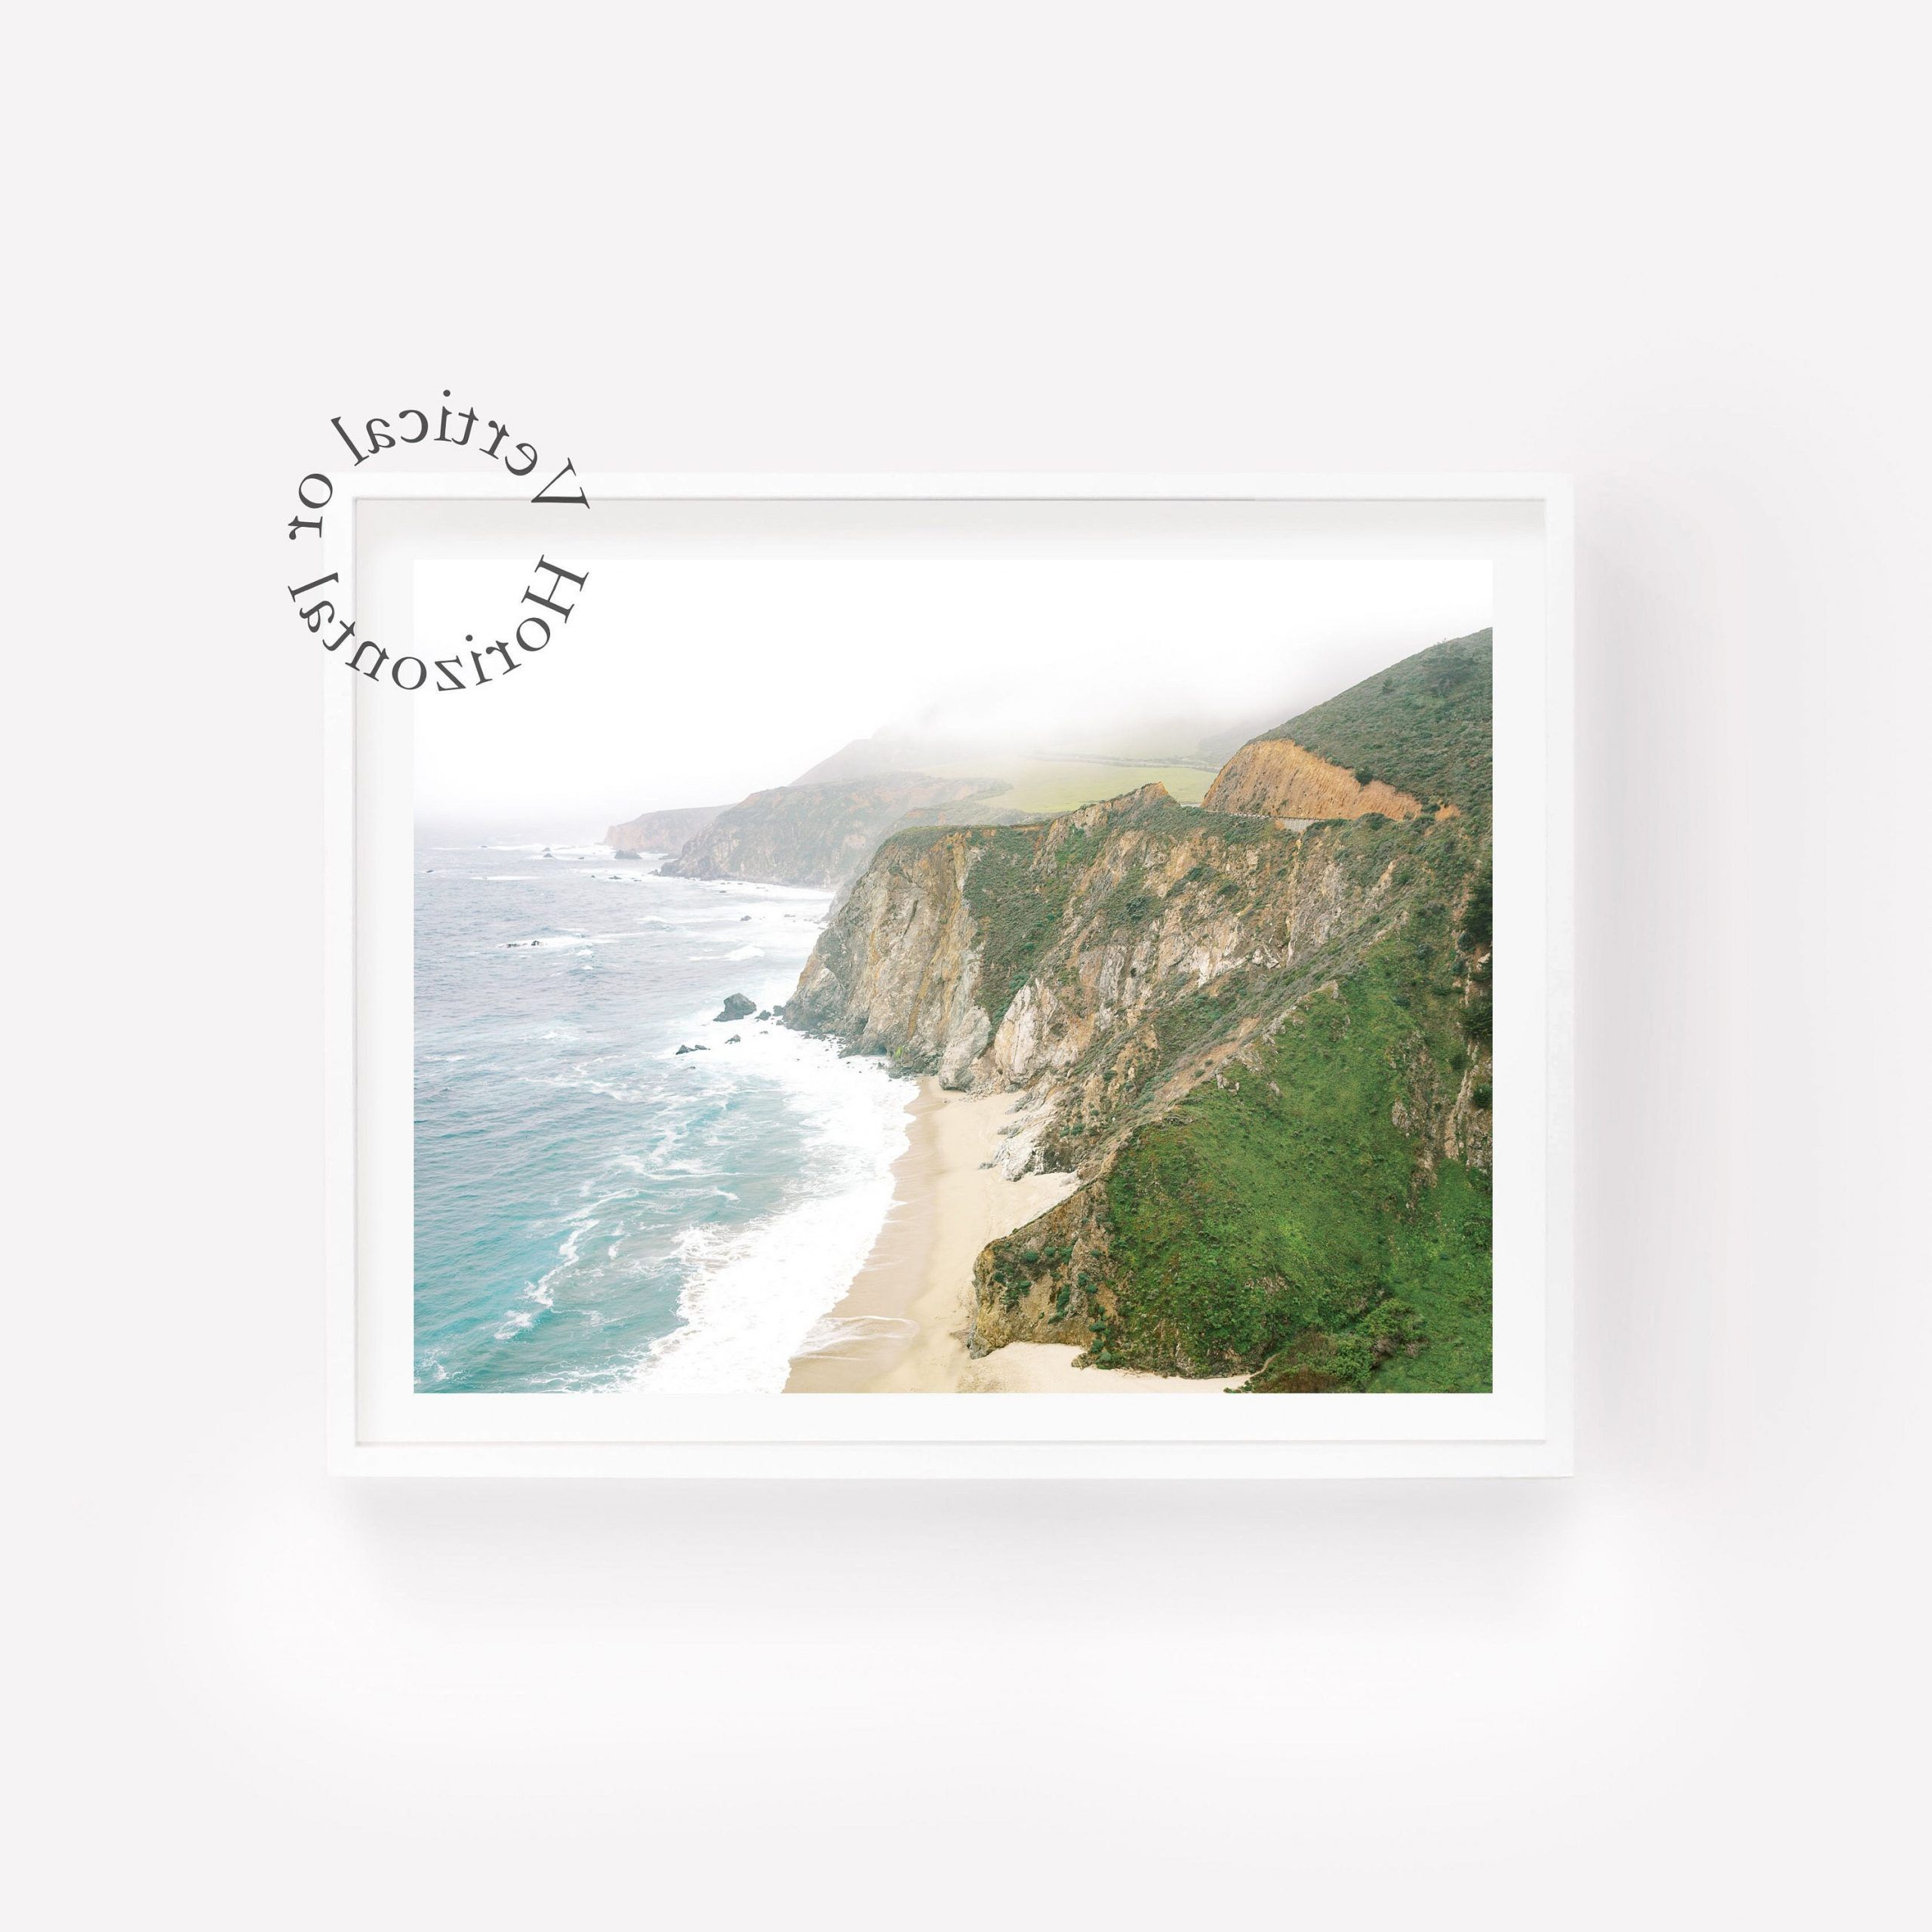 Big Sur Photography Big Sur Wall Art Coastal Wall Decor – Etsy Within Current Big Sur Wall Art (View 4 of 15)